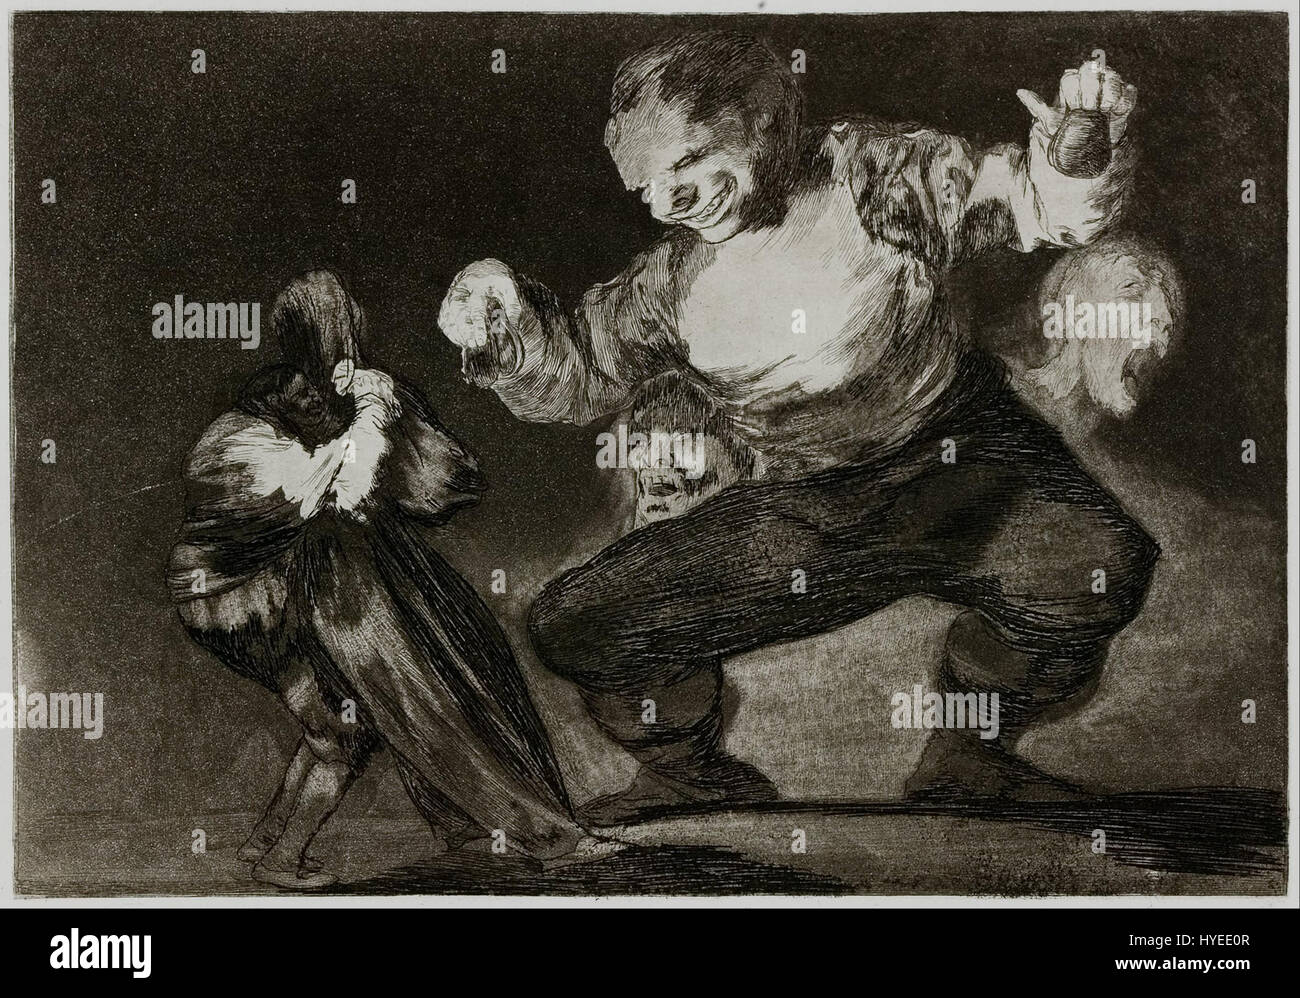 Francisco Goya   Simpleton   plate 4 from the series 'Los Disparates' (The Follies)   Google Art Project Stock Photo